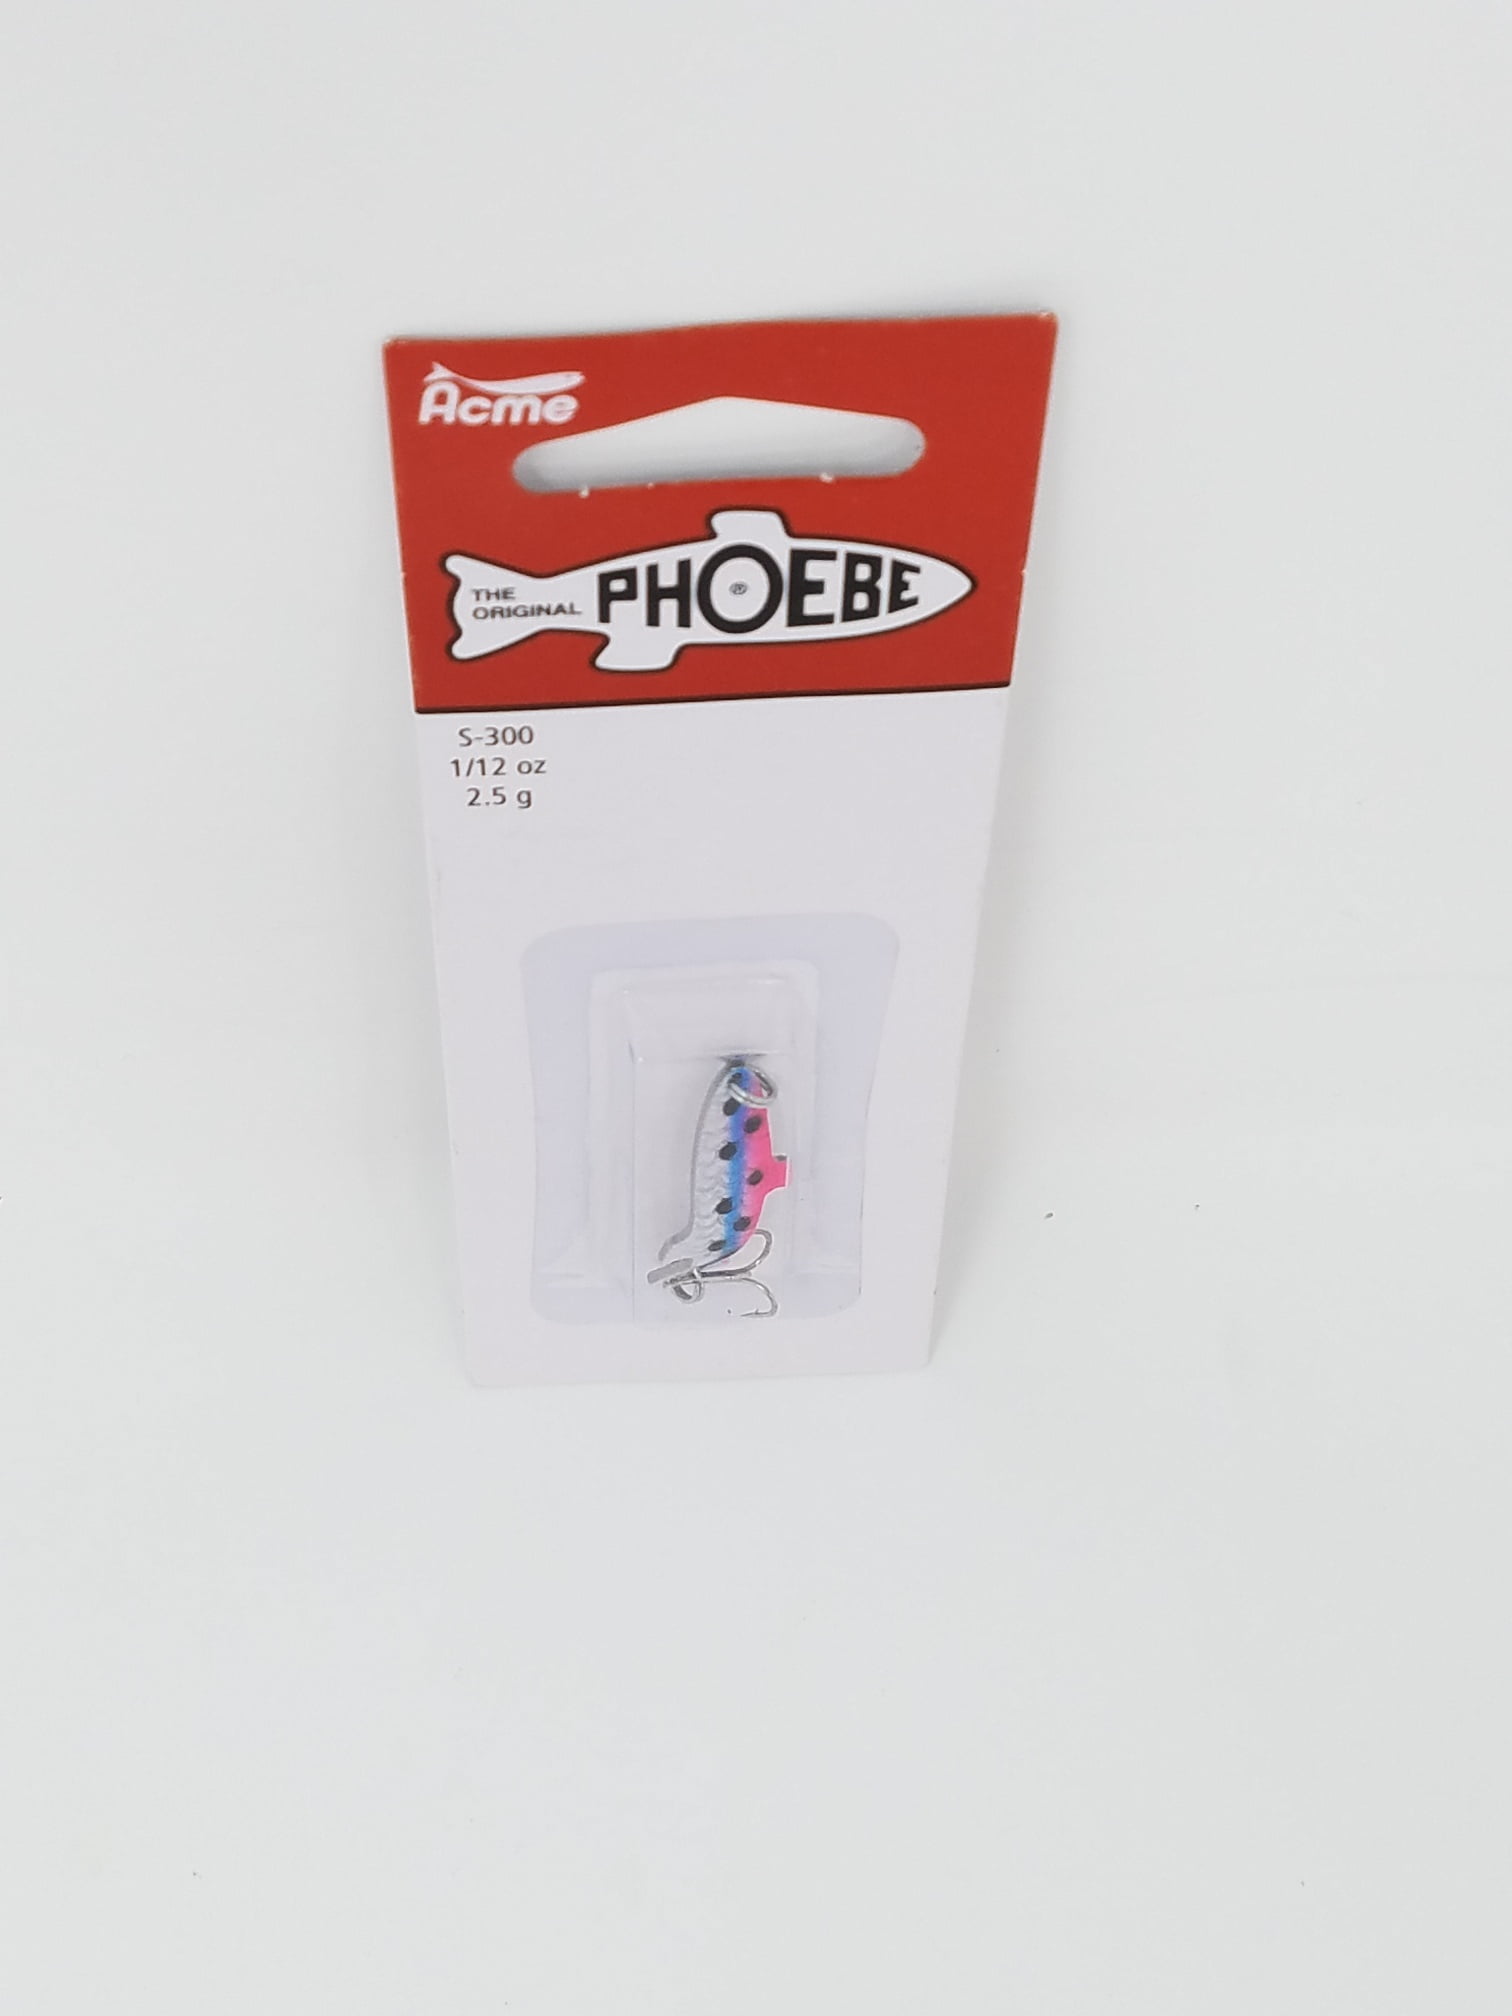 Acme Tackle Phoebe Fishing Lure Spoon Rainbow Trout 1/12 oz. 